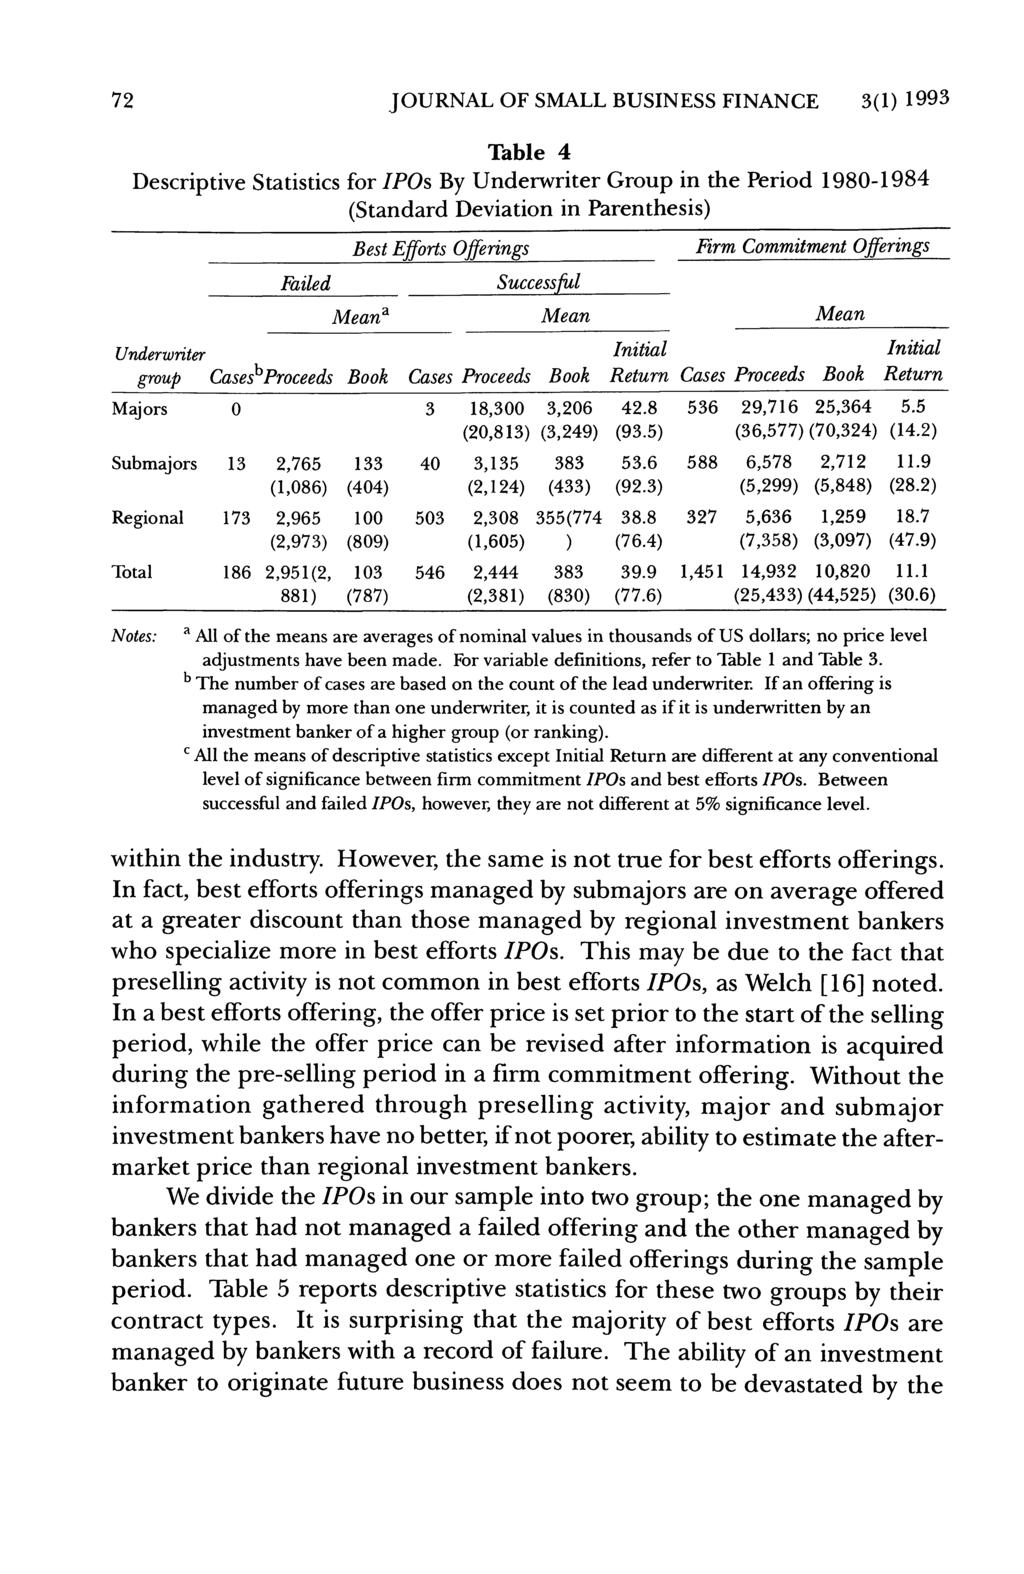 72 JOURNAL OF SMALL BUSINESS FINANCE 3(1) 1993 Table 4 Descriptive Statistics for IPOs By Underwriter Group in the Period 1980-1984 (Standard Deviation in Parenthesis) Failed Best Ejforts Offerings